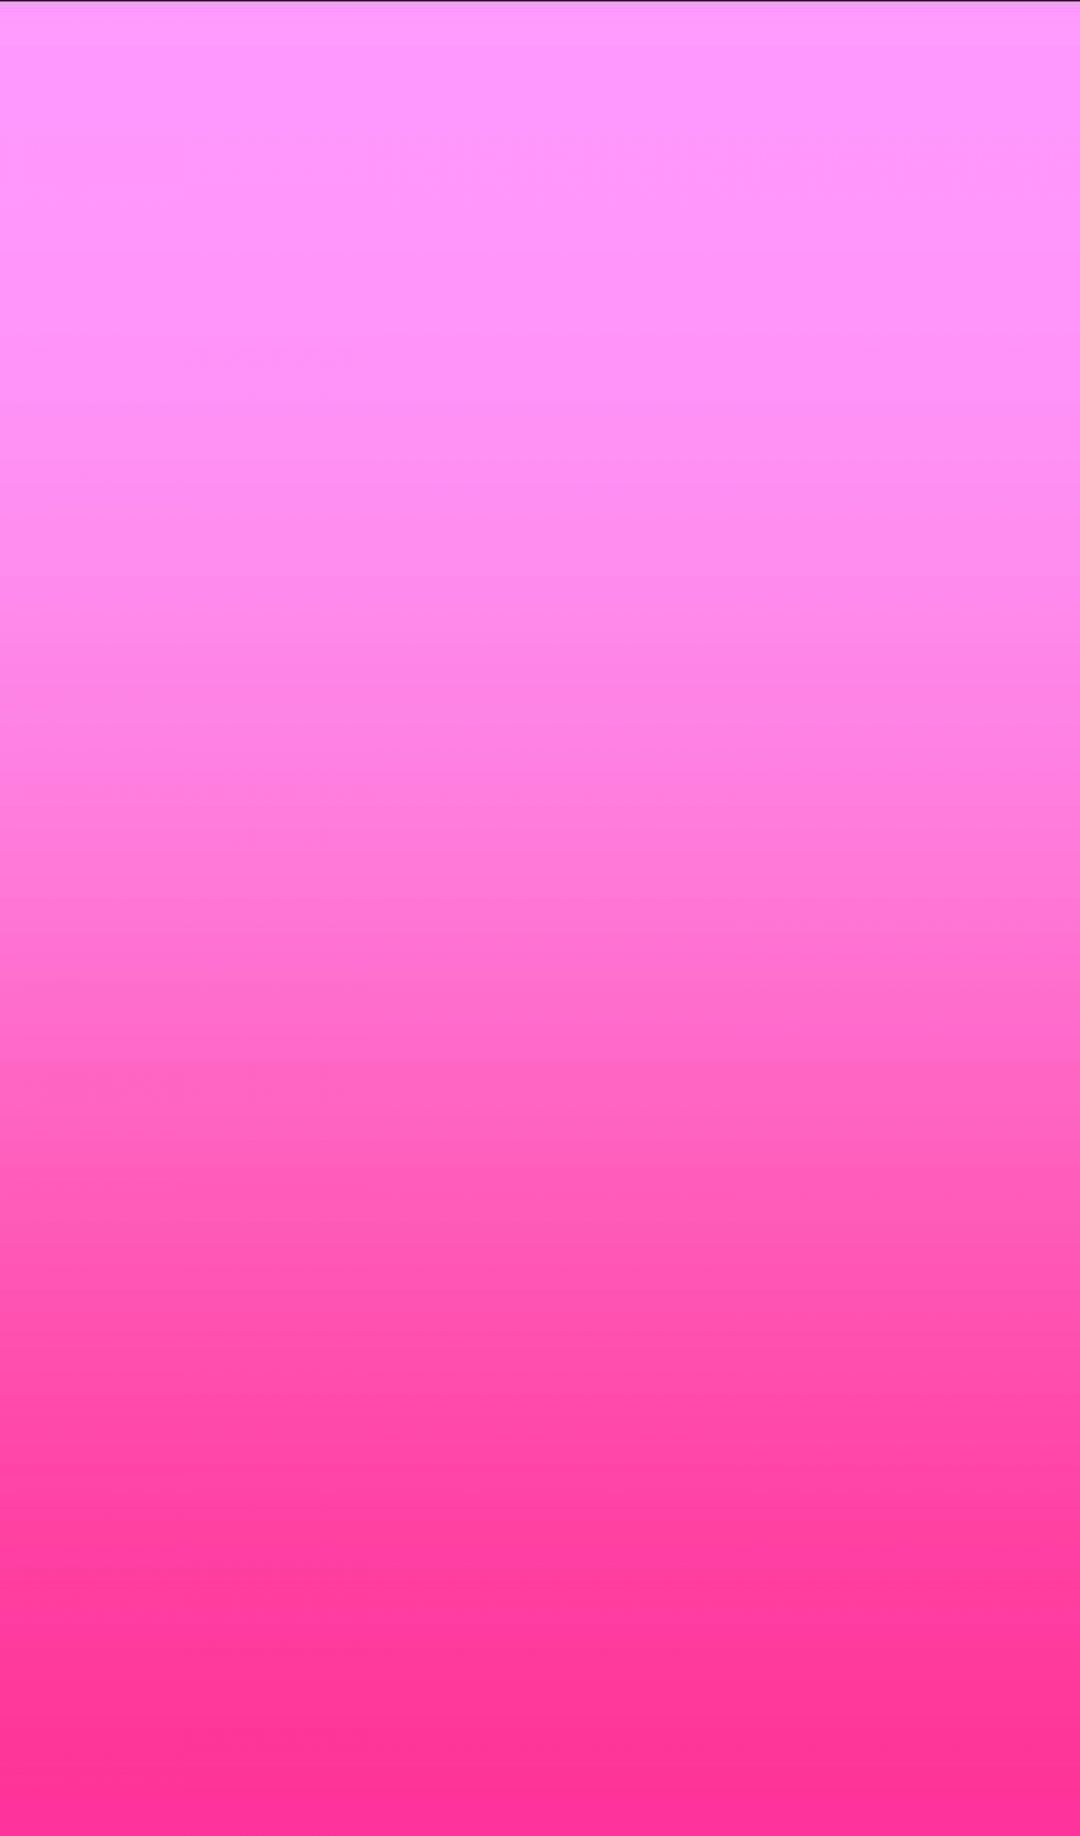 ✓ [100+] Hot Pink - Android, iPhone, Desktop HD Backgrounds / Wallpapers  (1080p, 4k) (2023)